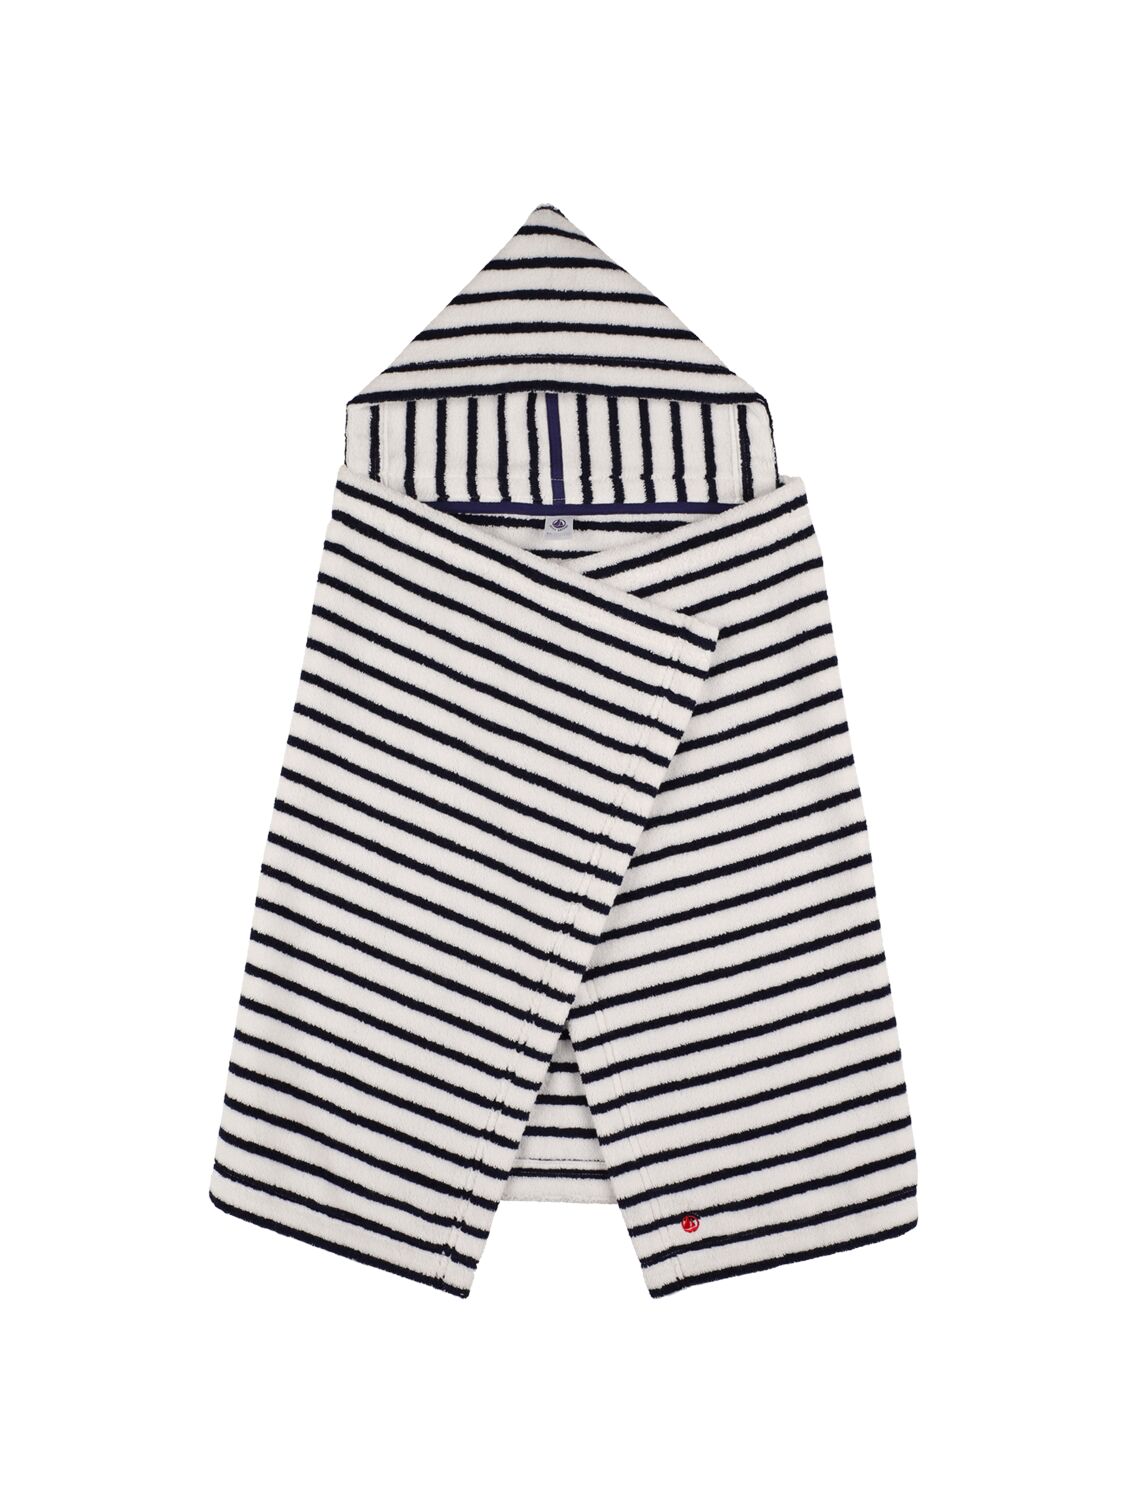 Image of Striped Cotton Towel W/ Hood